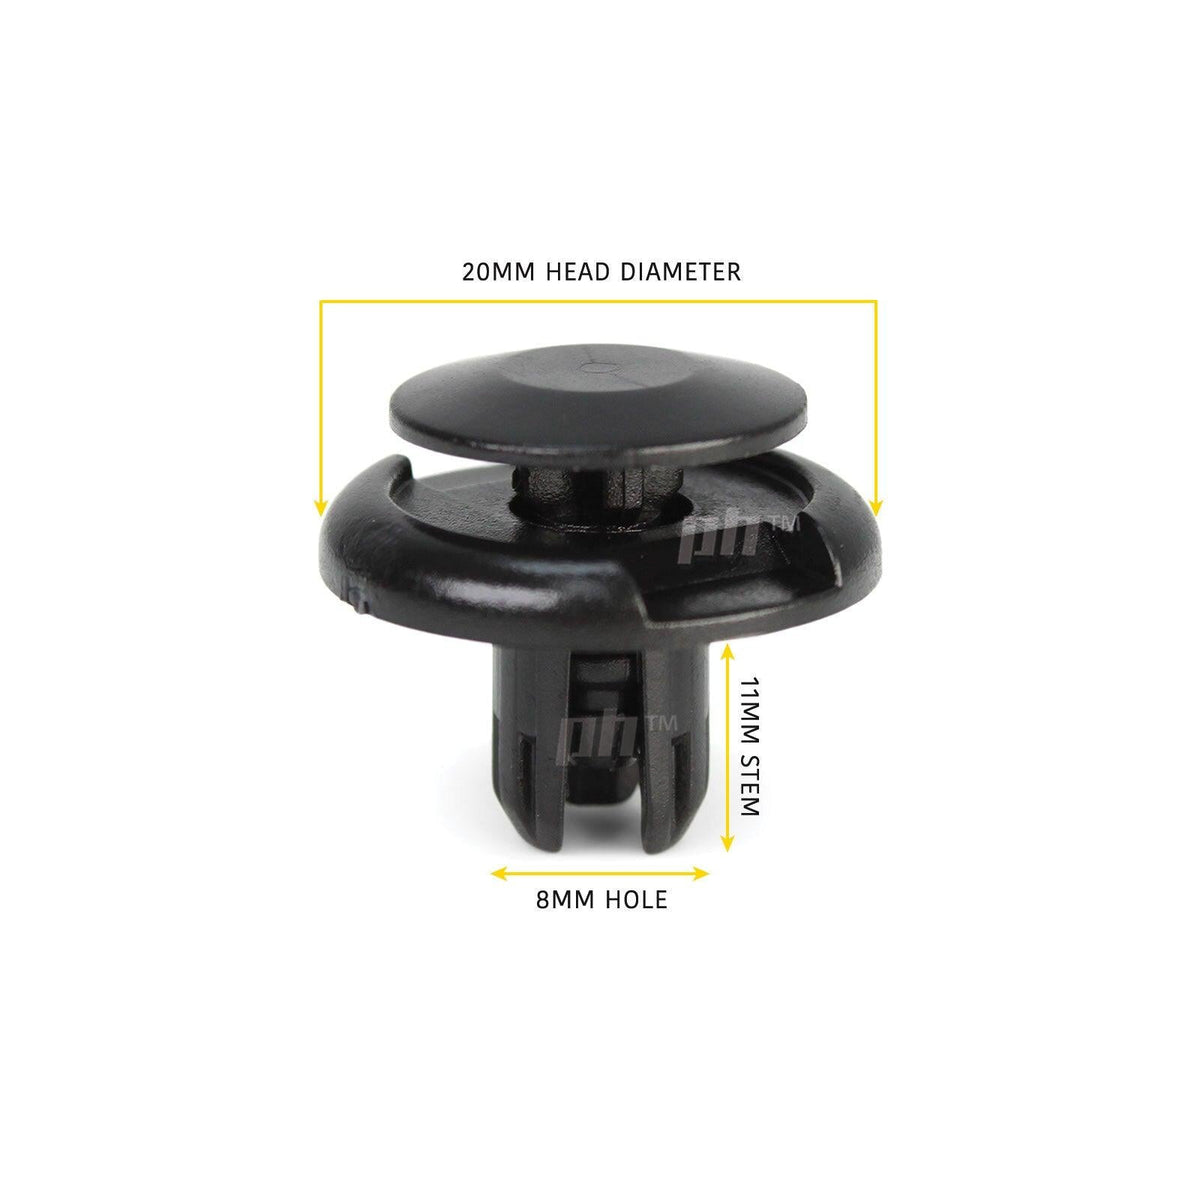 Panel House - Push In Retainer Clip x5 8mm Hole Type fits Honda Models - 4X4OC™ | 4x4 Offroad Centre